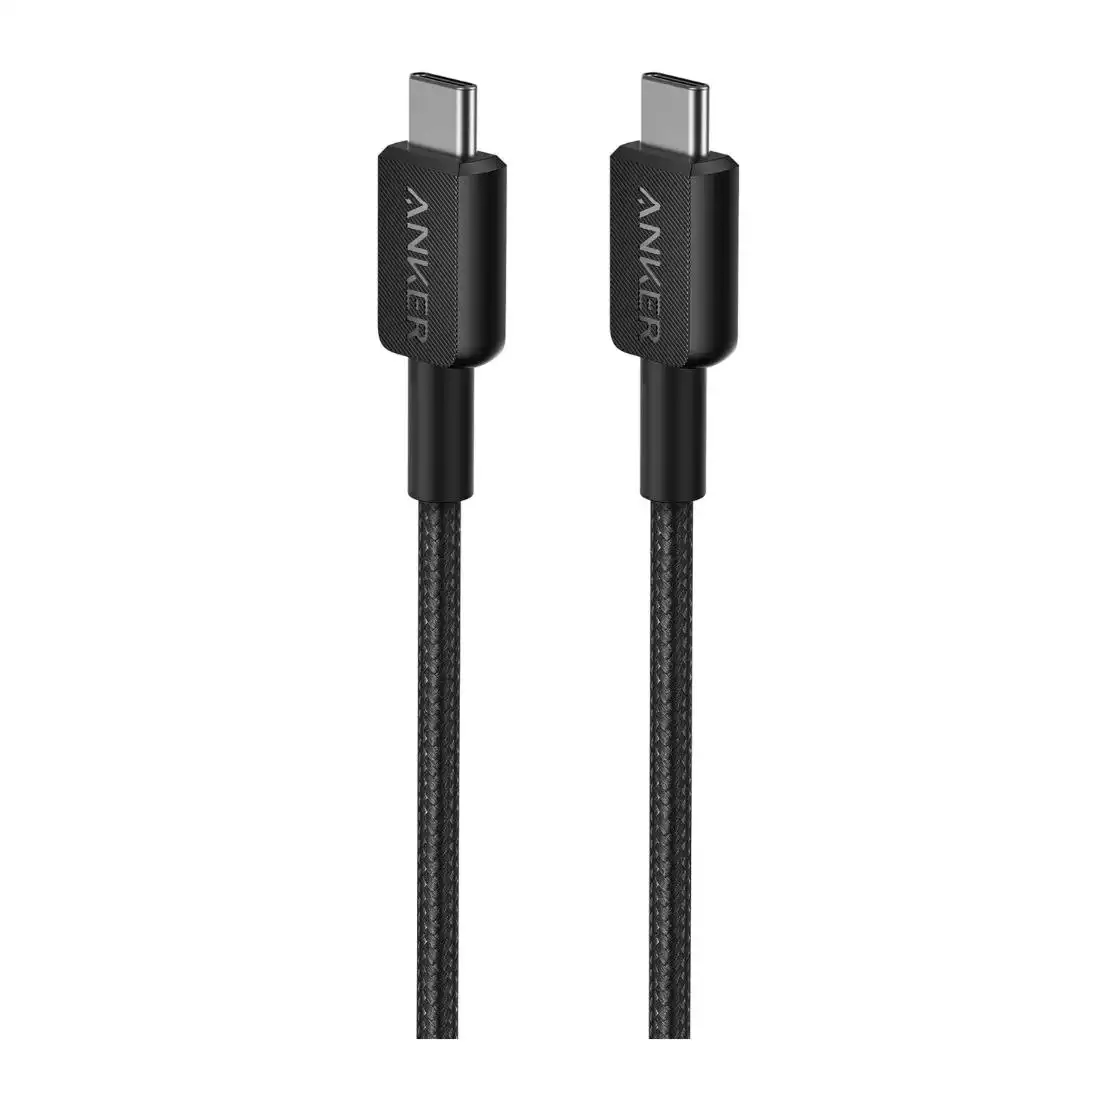 Anker 322 USB-C to USB-C Cable (1.8m Braided) - Black